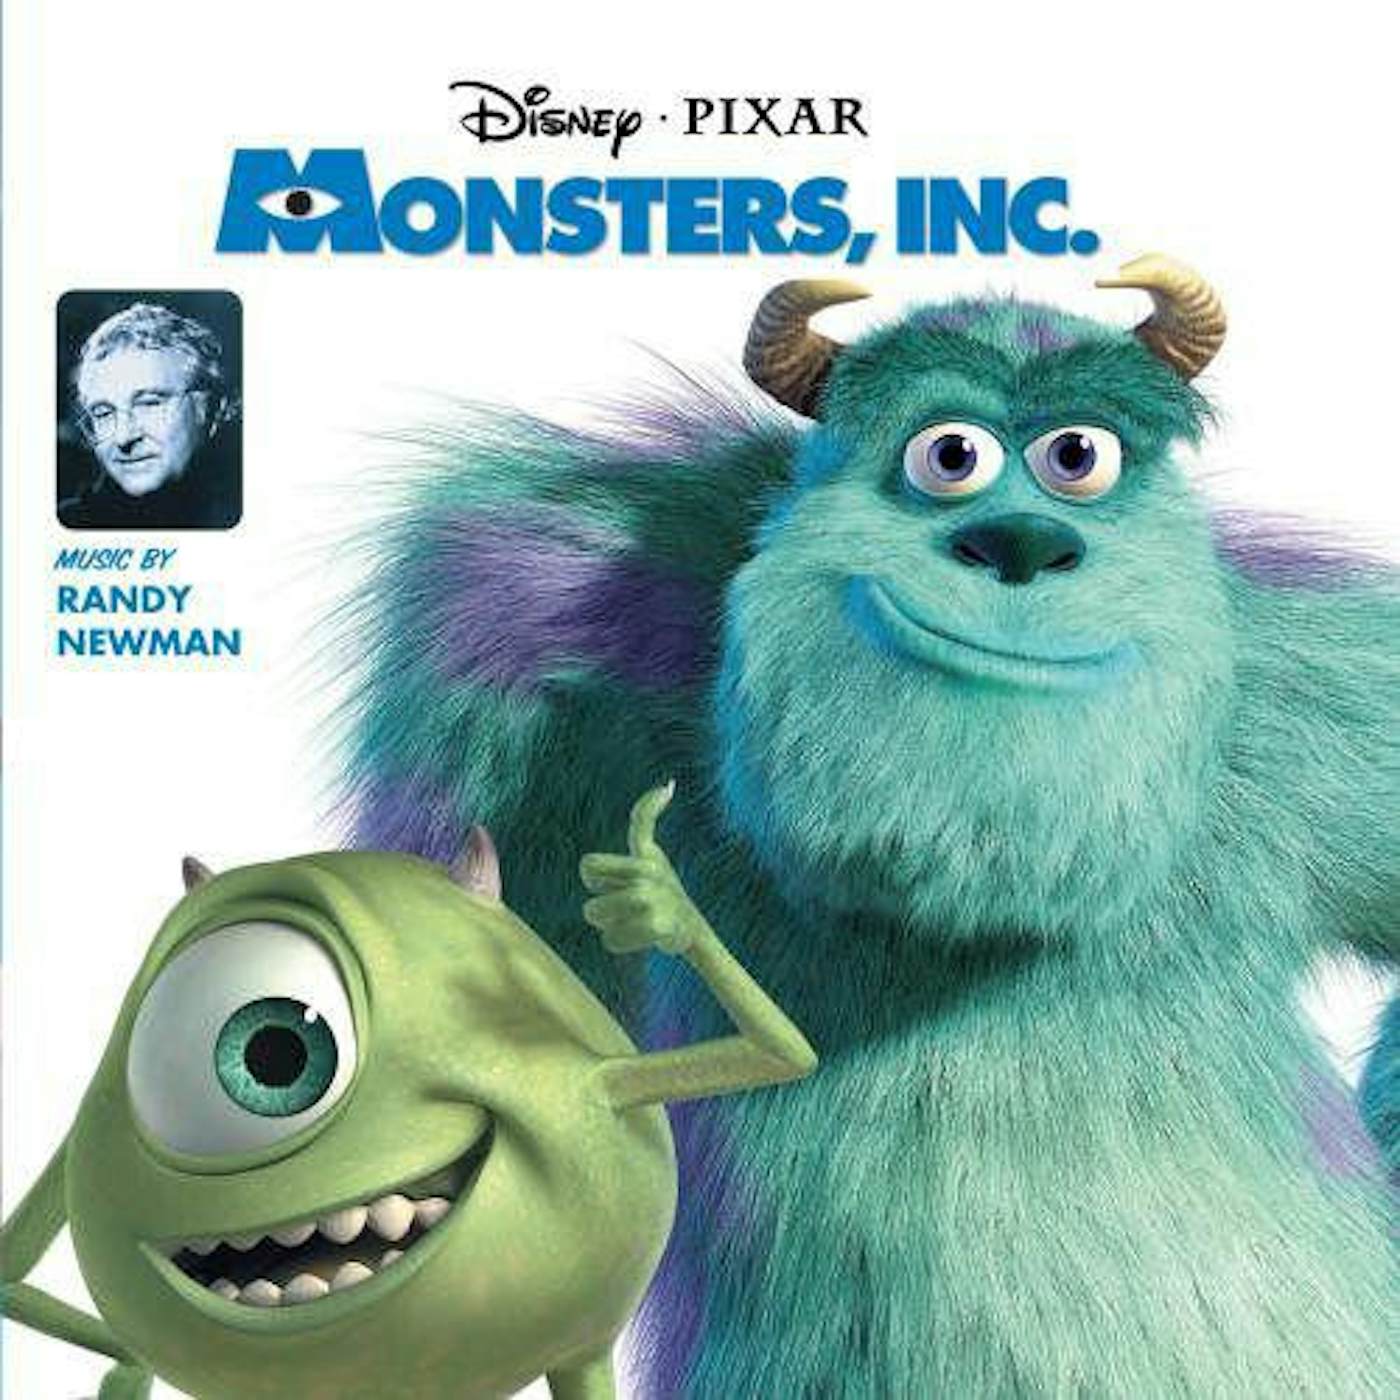 Randy Newman MUSIC FROM MONSTERS INC Vinyl Record